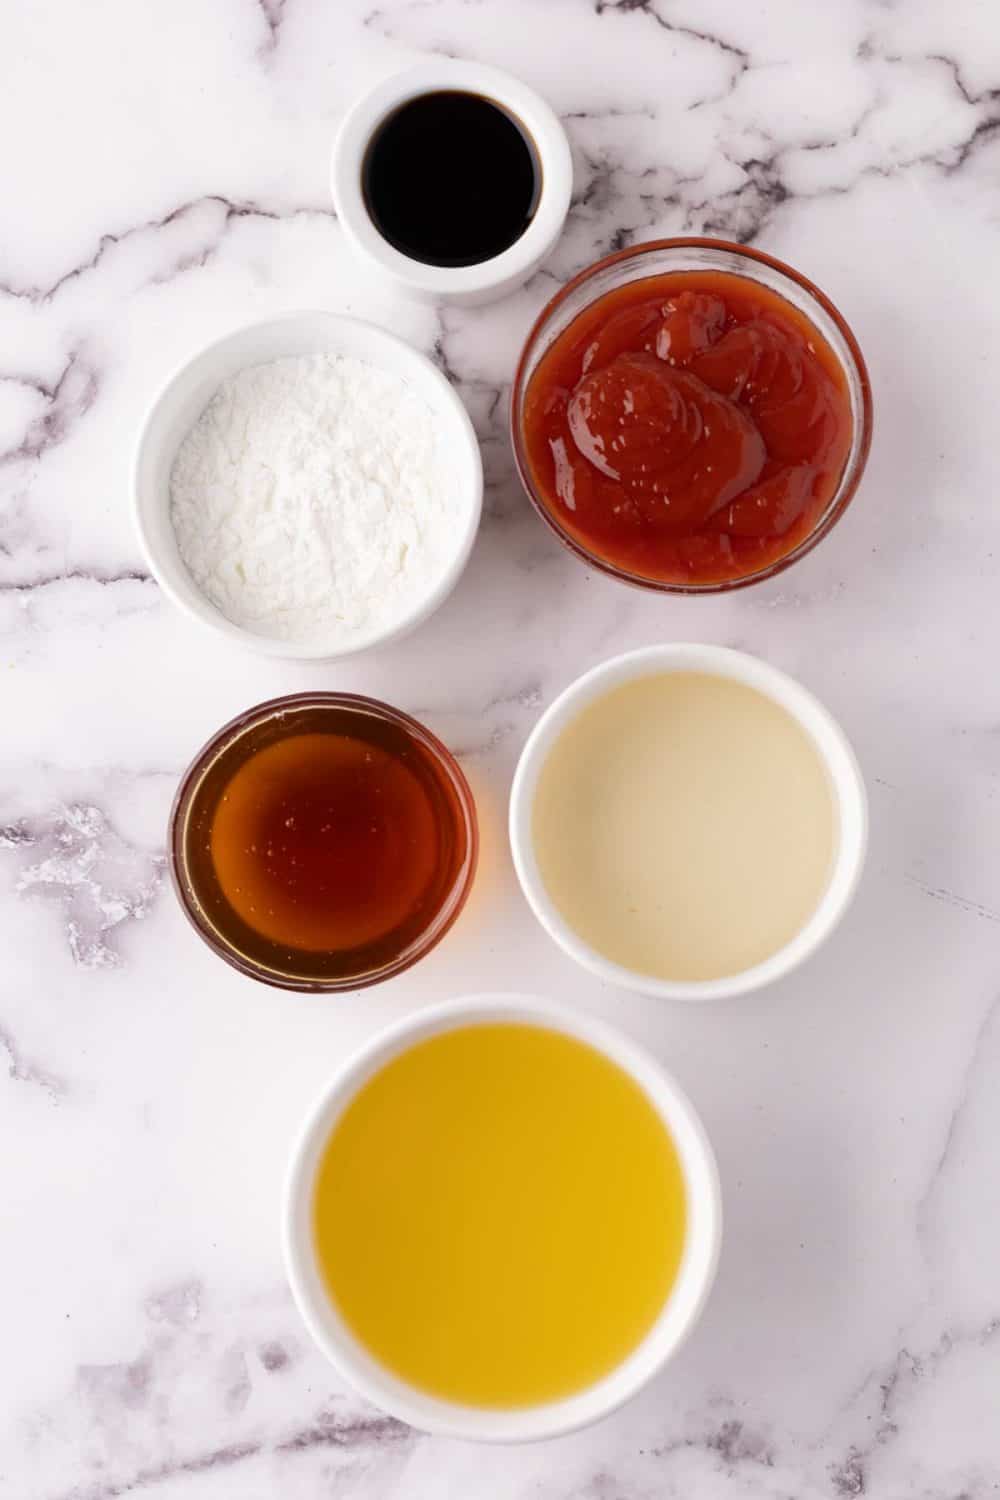 Ingredients for making sweet and sour sauce.